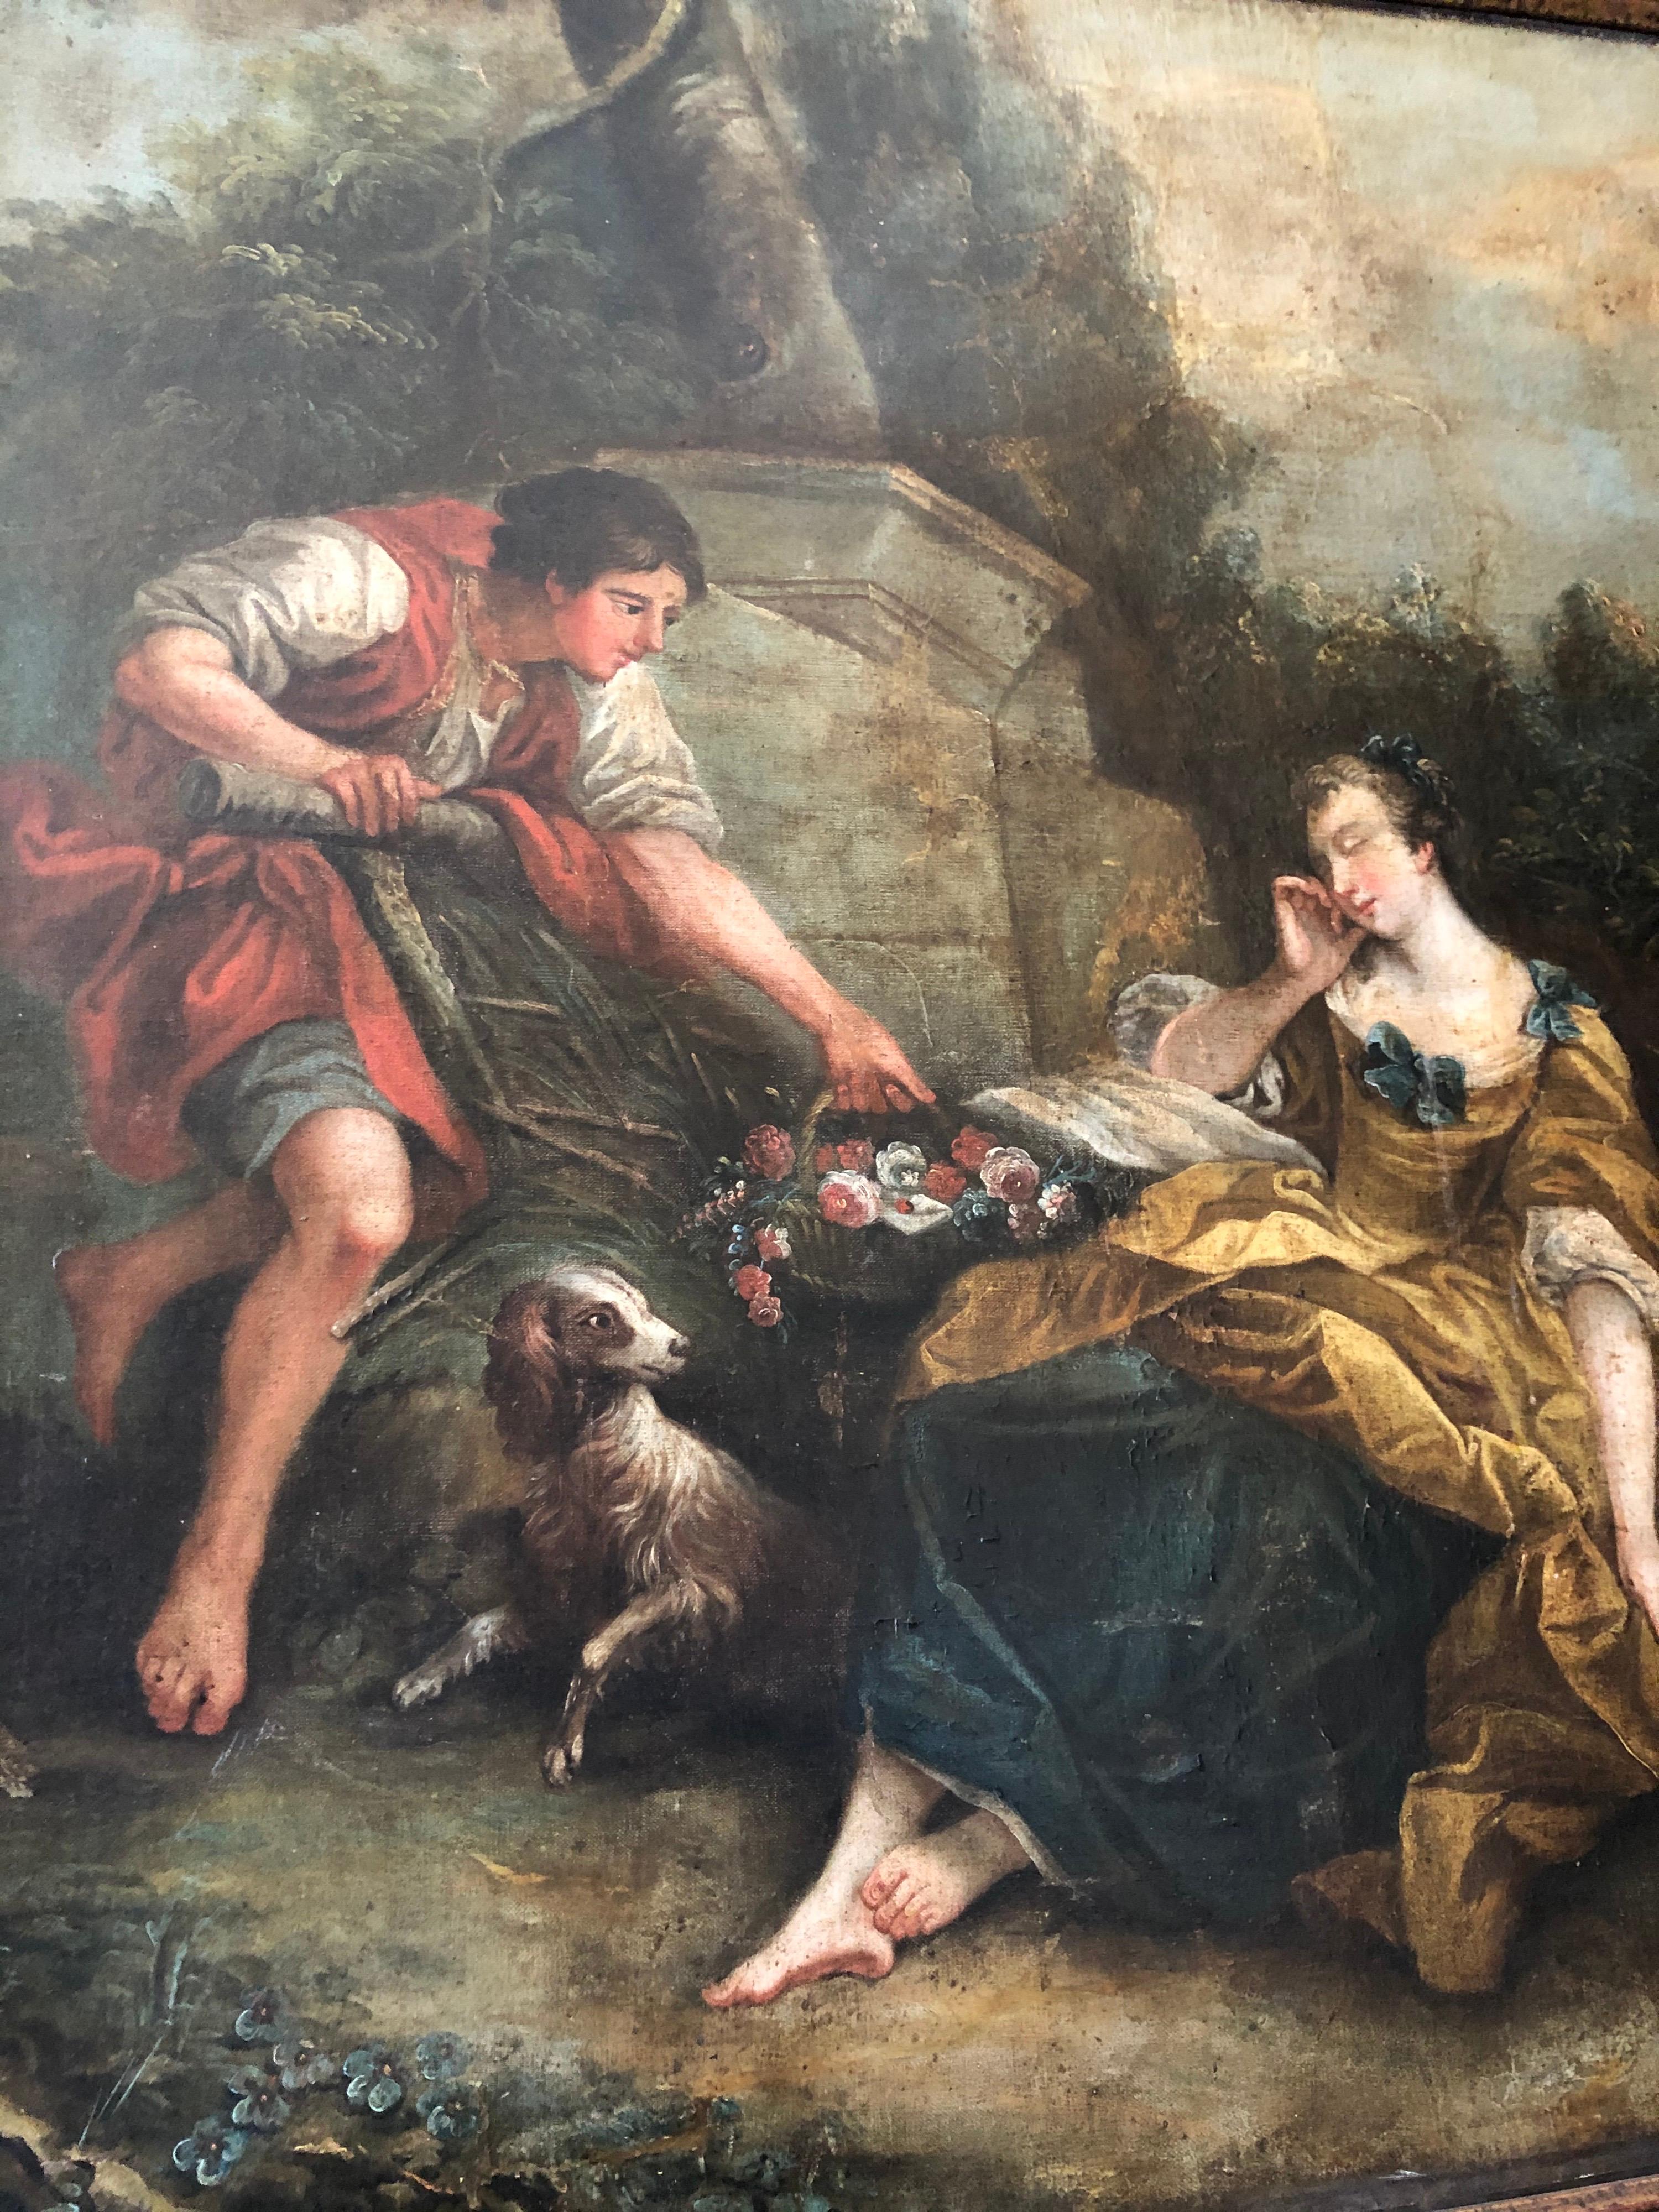 This oil painting in the style of Francois Boucher origins from France, circa 1860.